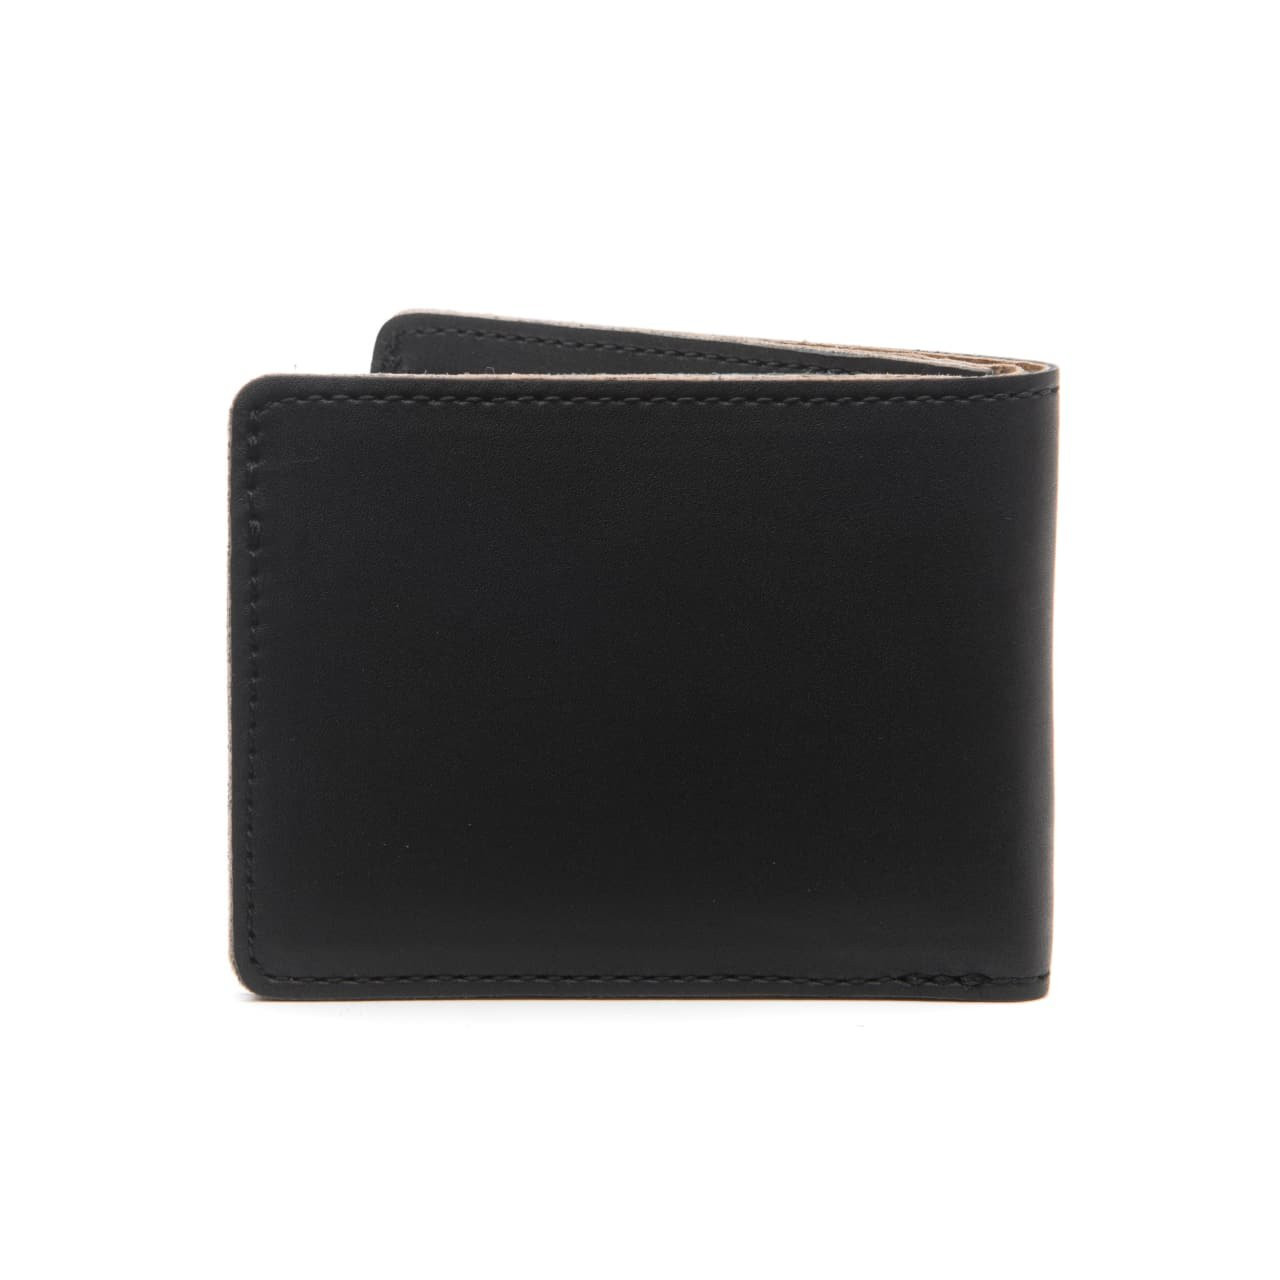 The Best Of Black - 5 Add Ons And Accessories  Mens accessories fashion, Wallet  men, Wallet